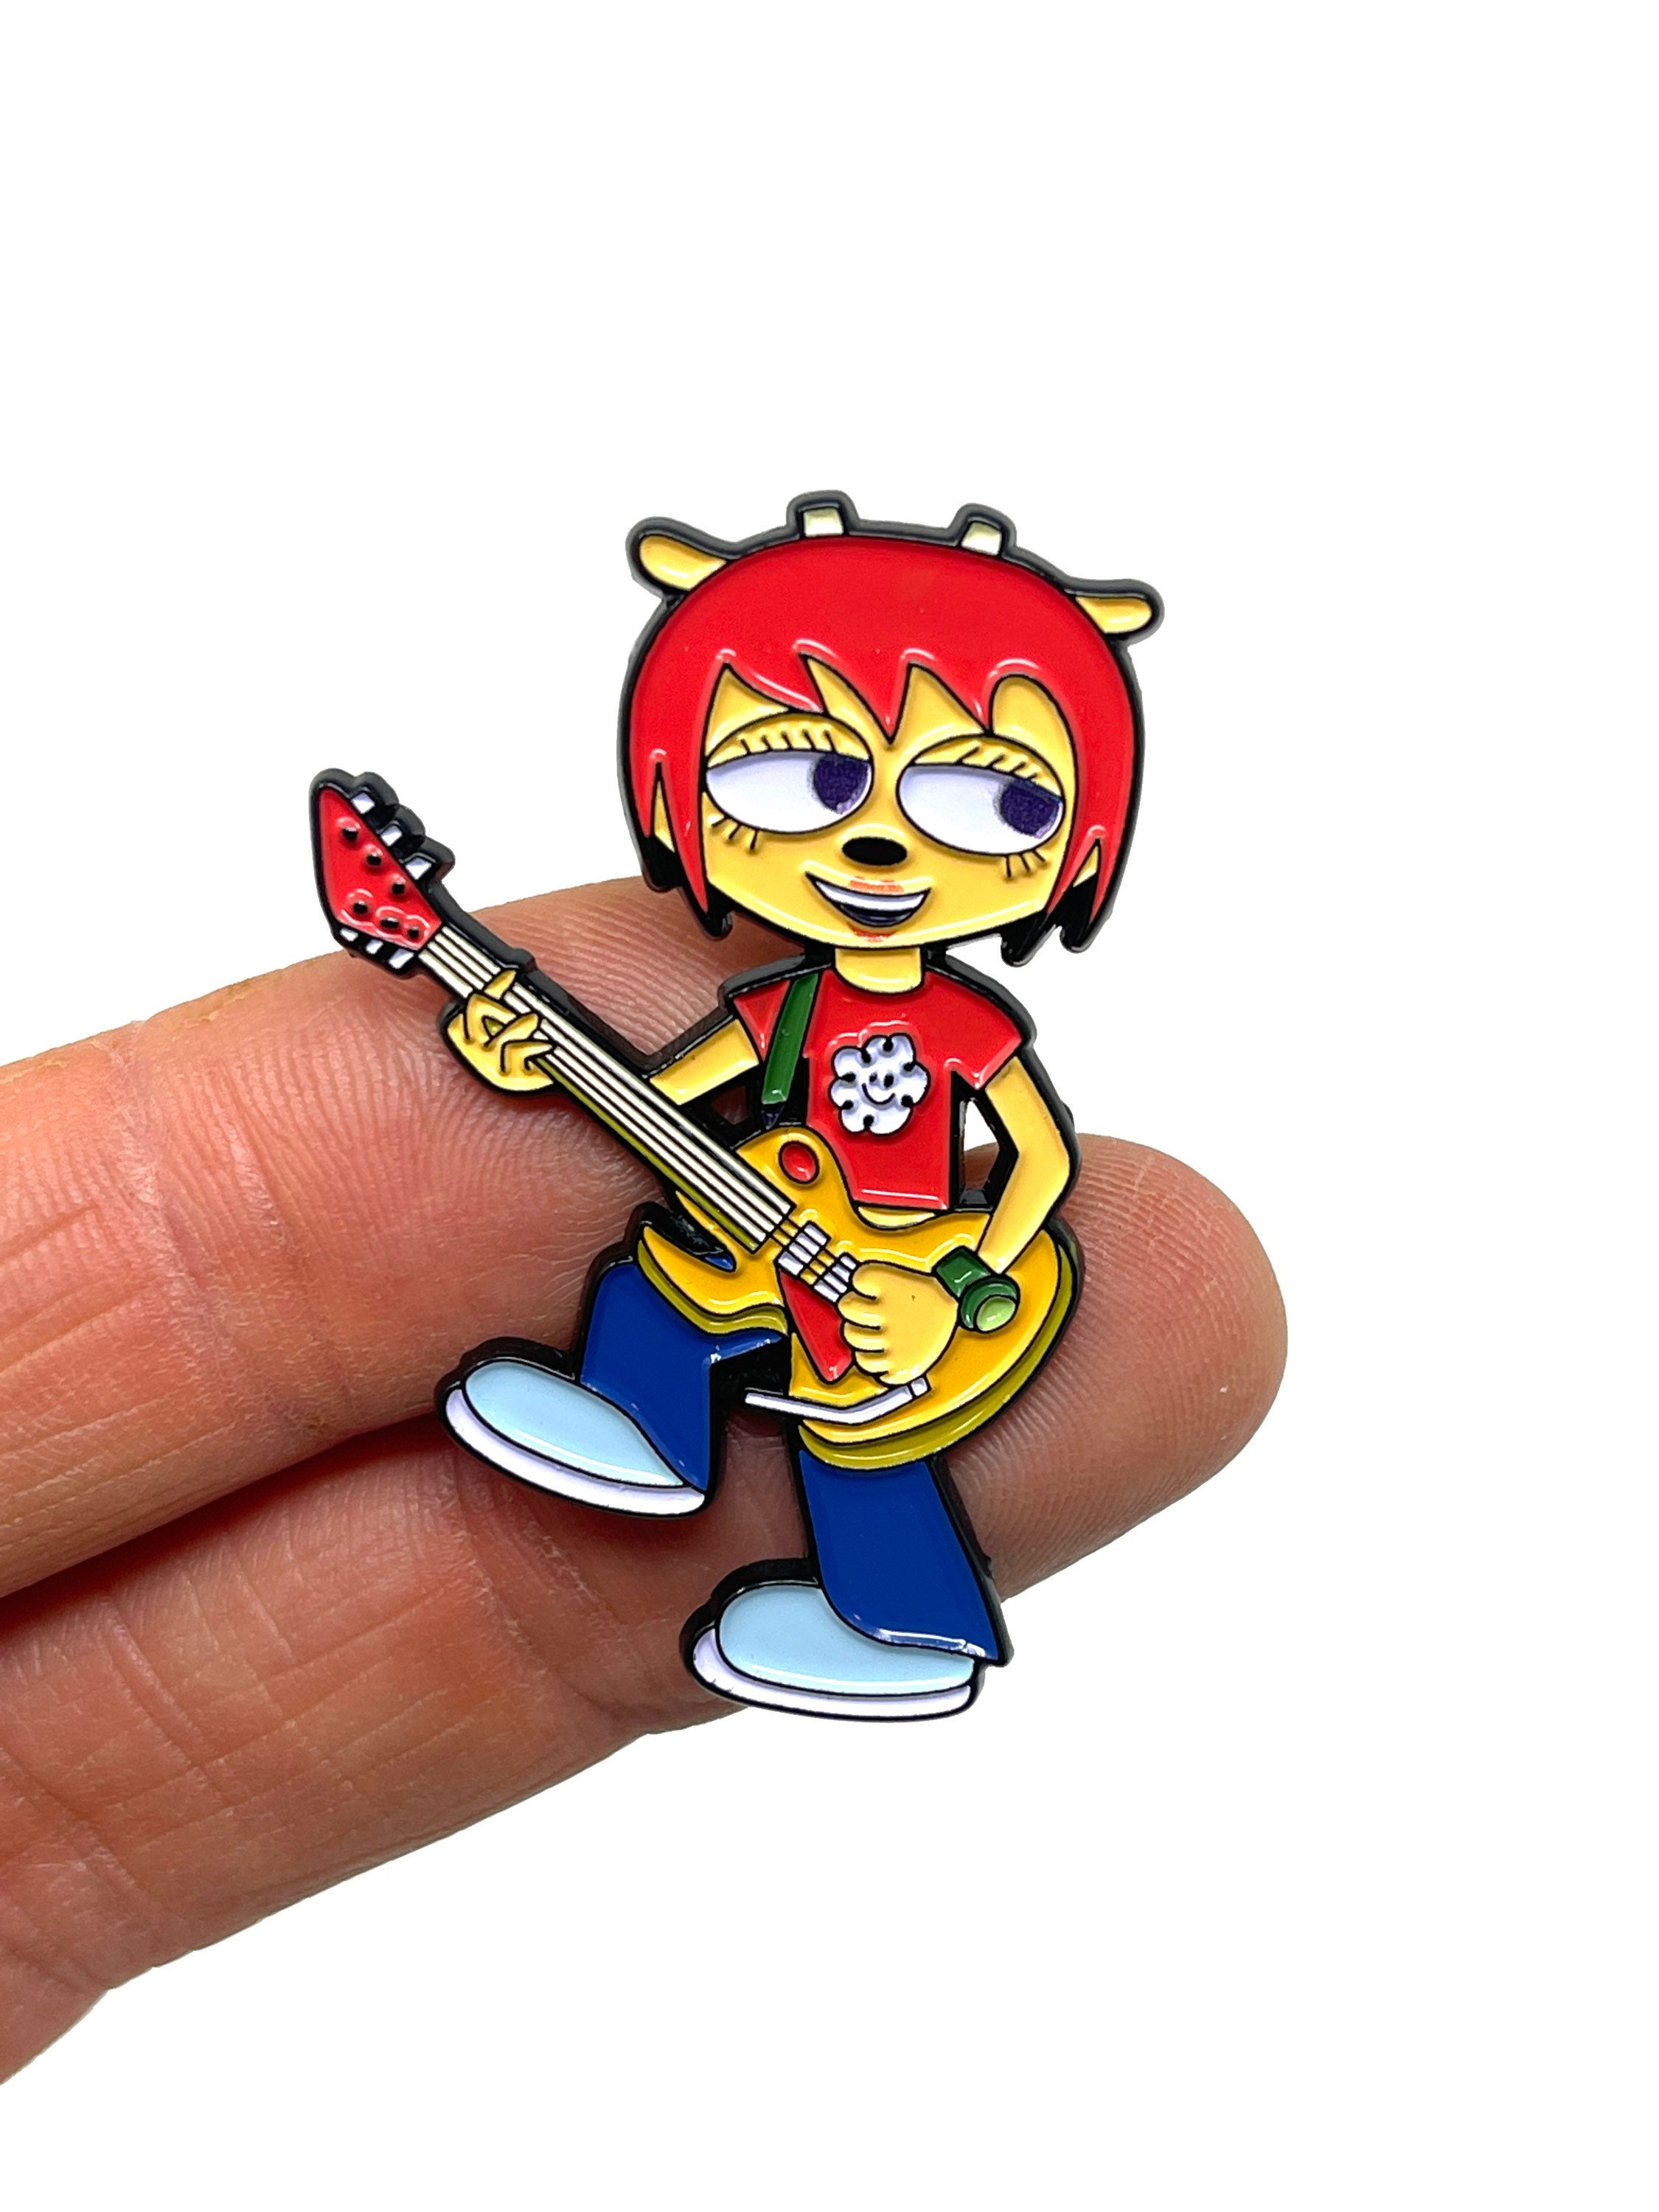 Parappa The Rapper Anime Gang 1 Pin for Sale by Assassinhedgie